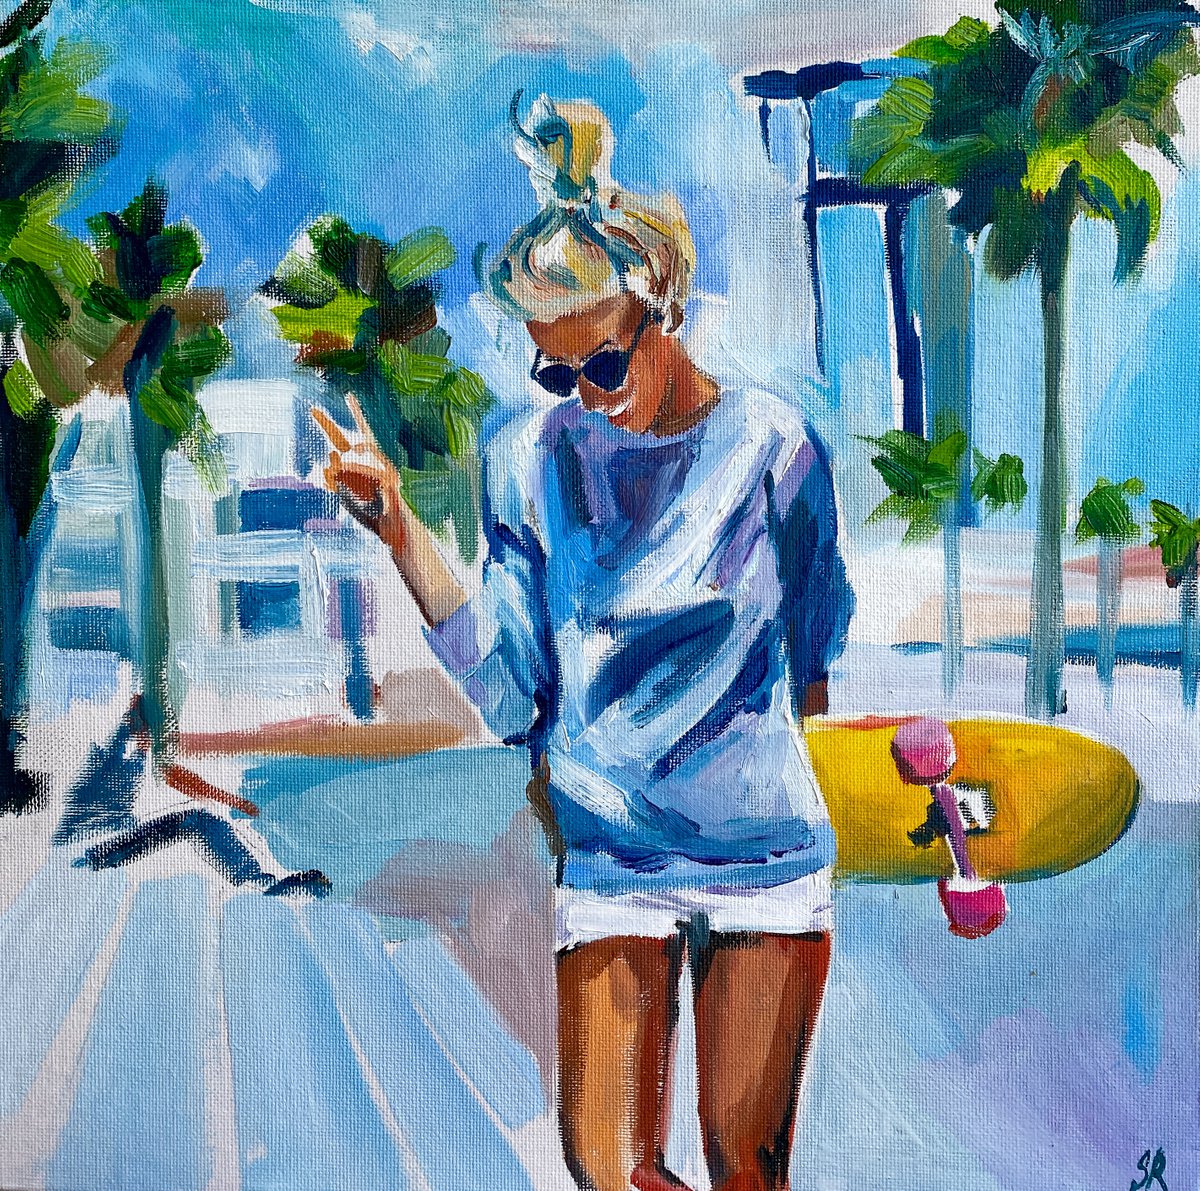 Summer Vibes - oil painting, original gift, summer, palm trees, skate, girl, city, blonde by Sasha Robinson